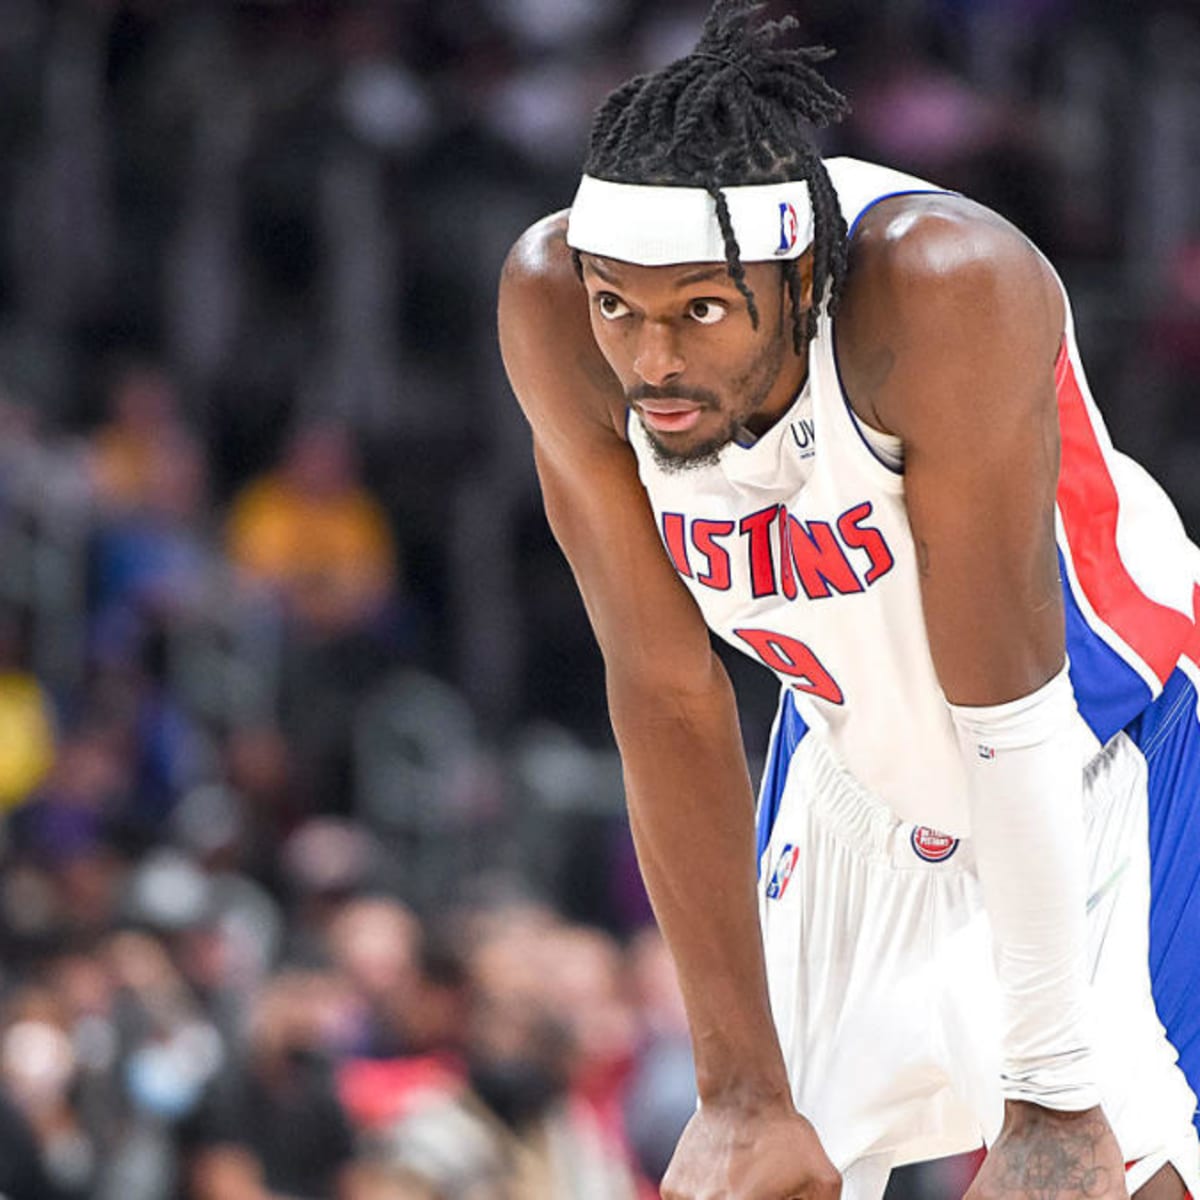 Jerami in the Wings Jersey : r/DetroitPistons